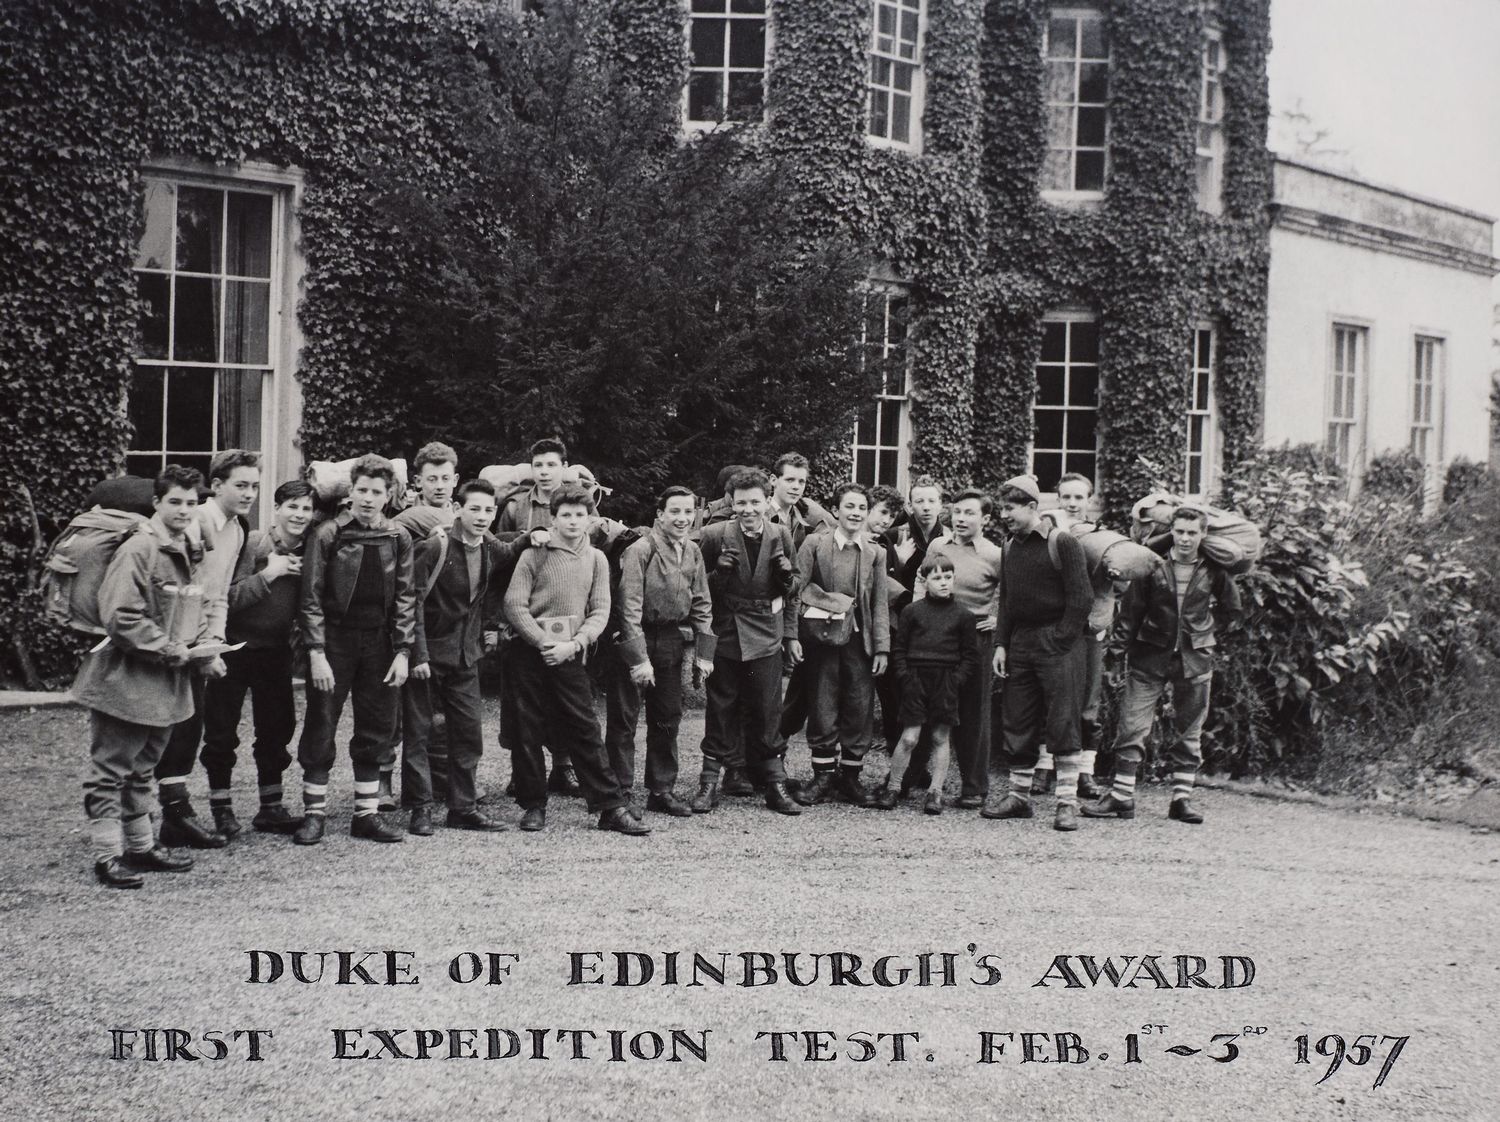 Photograph of a group of young boys with rucksacks and outdoor clothing pictured standing outside an ivy clad building who took part in the Duke of Edinburgh's Award First Expedition